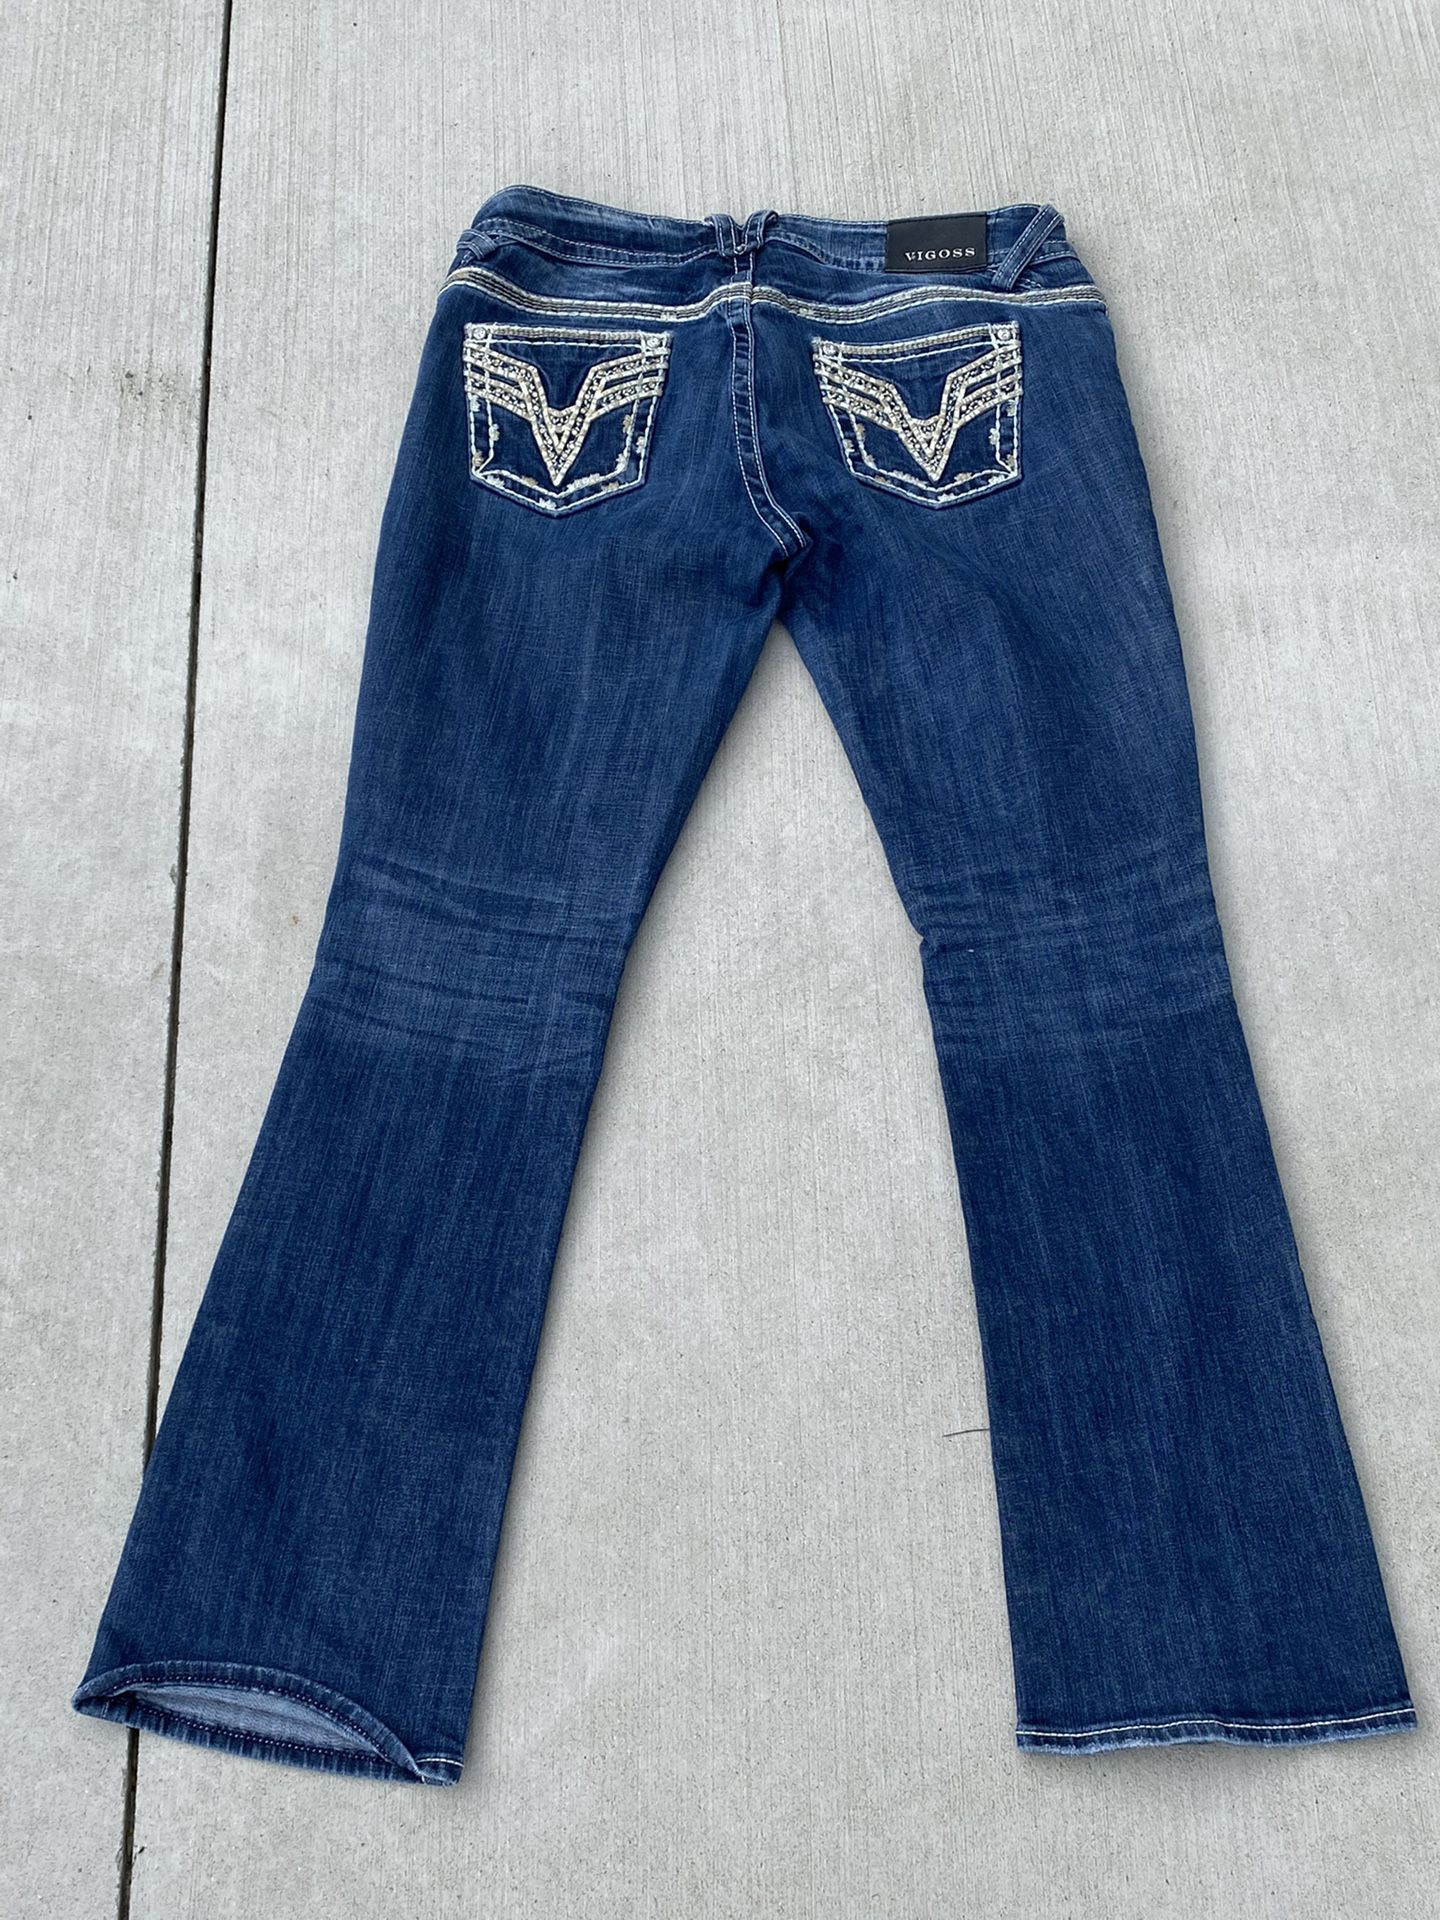 flare jeans 